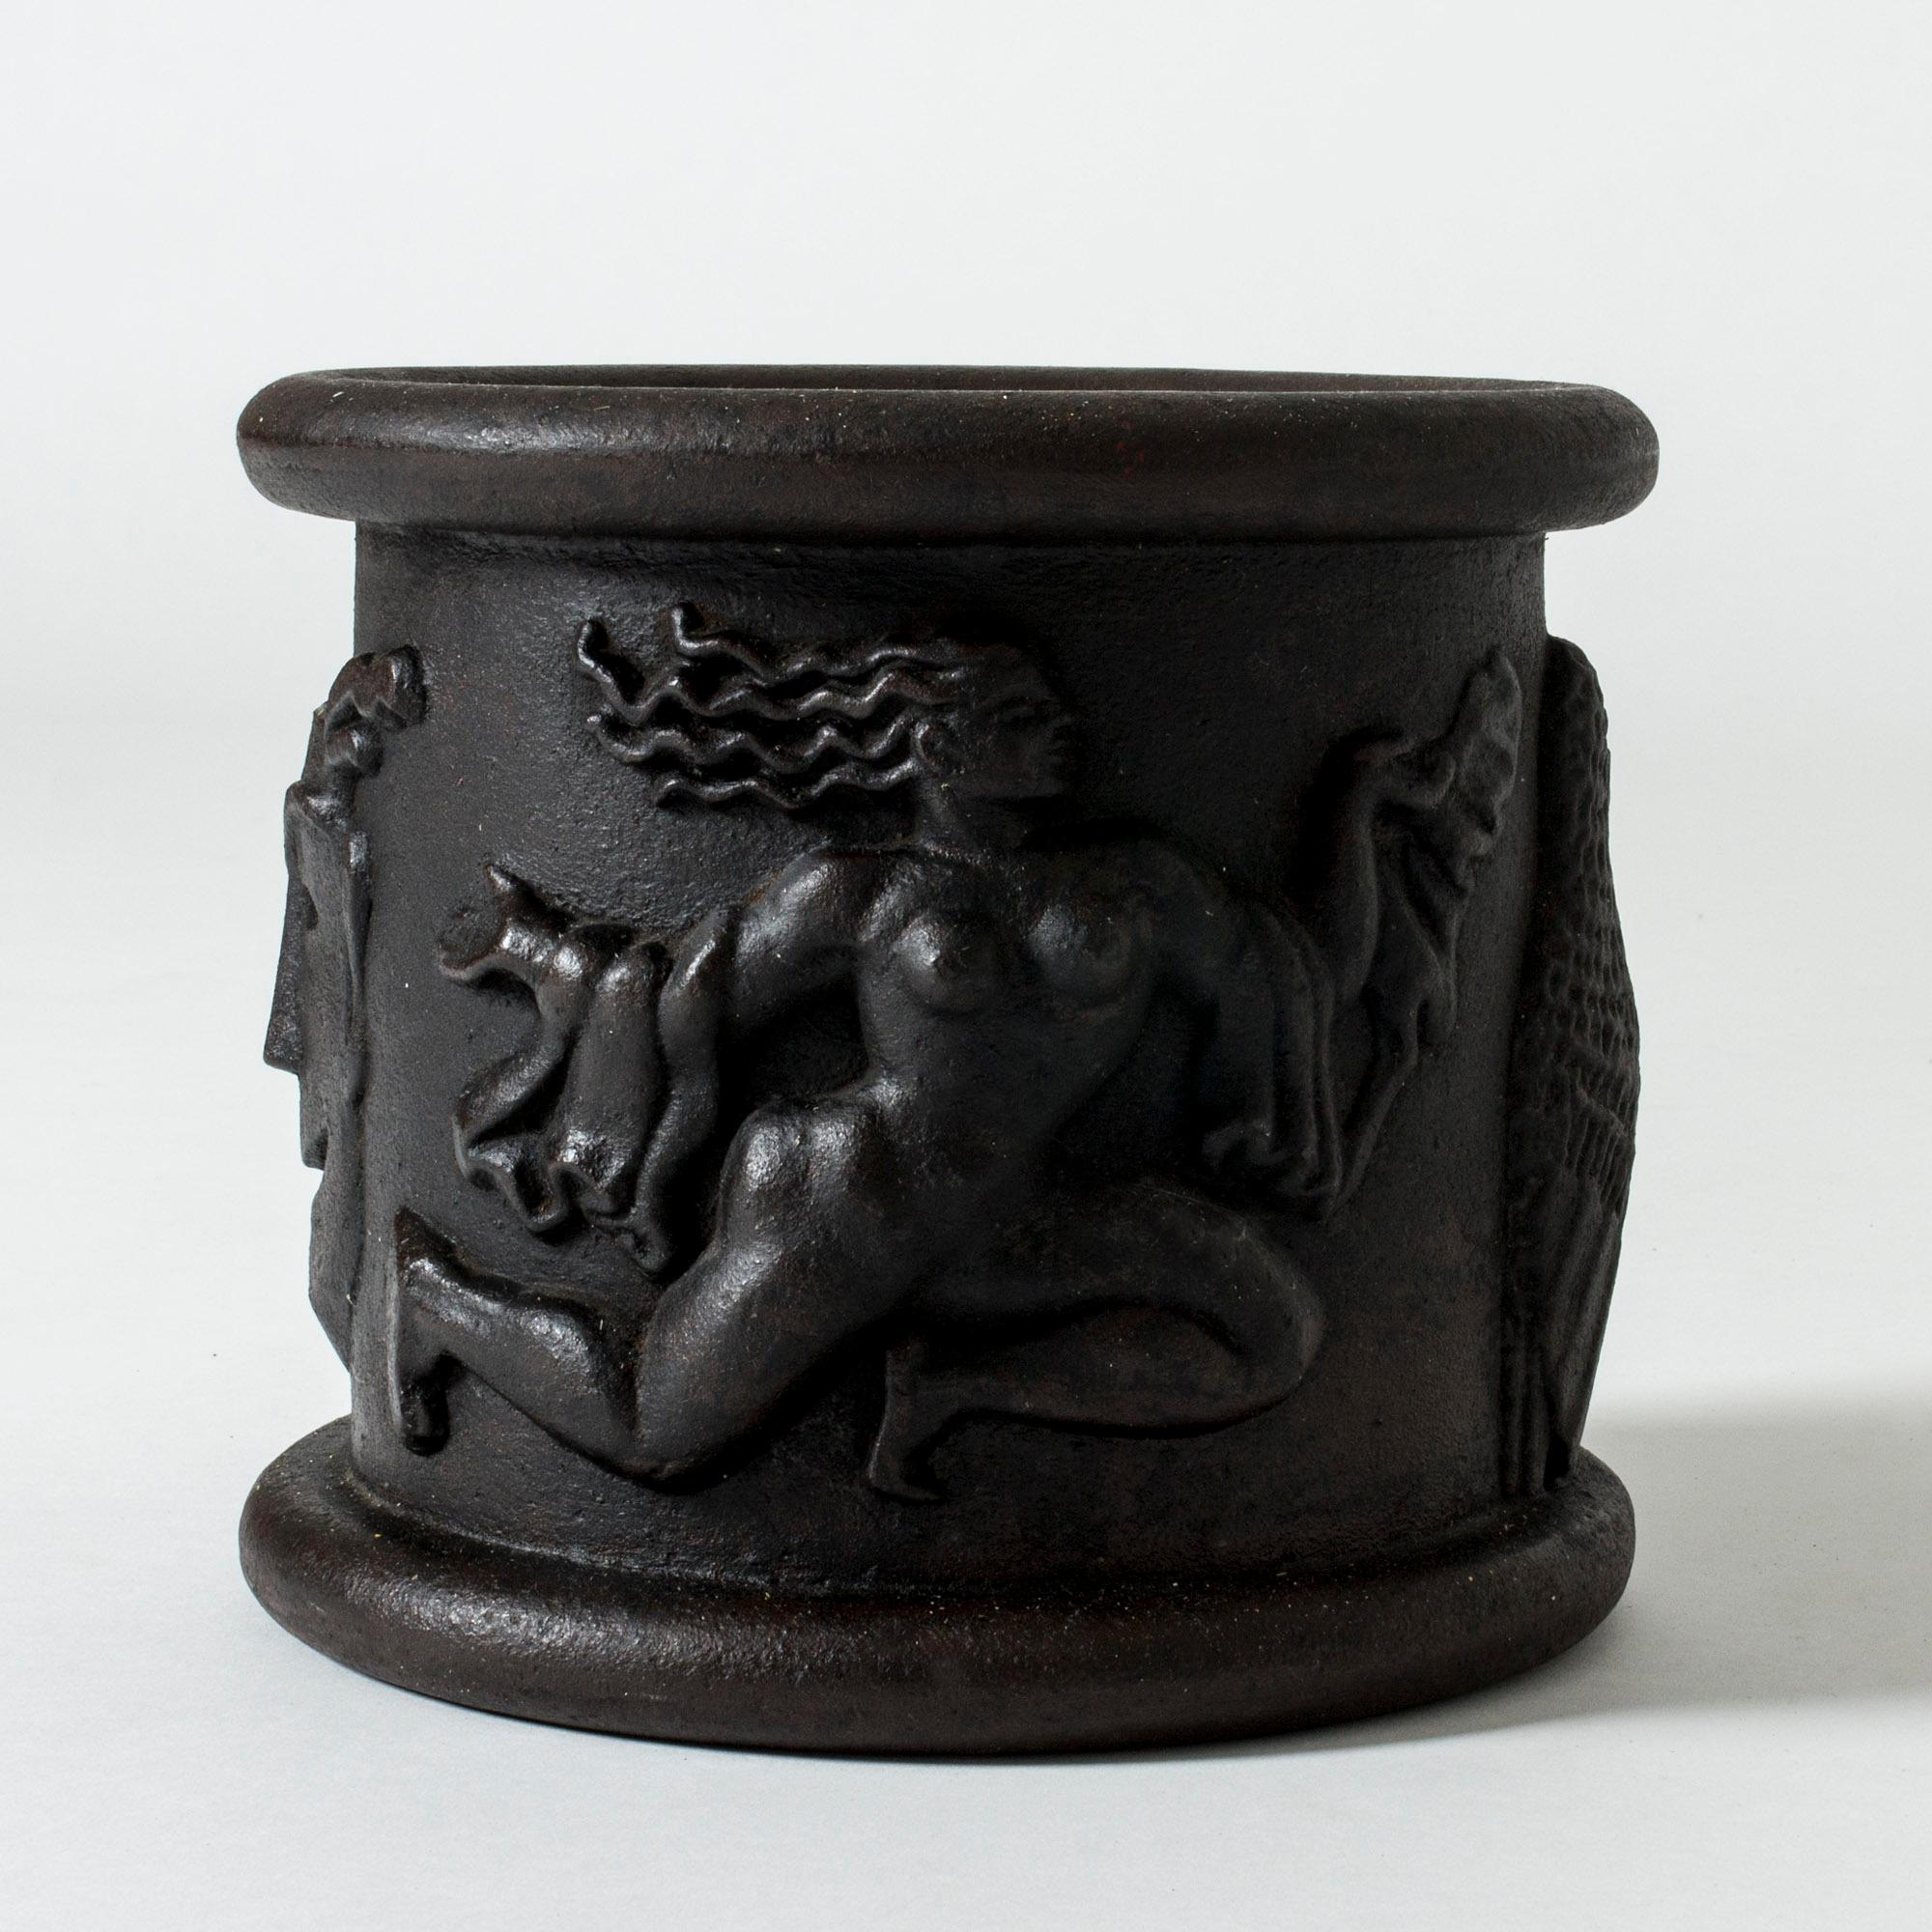 Flower pot #1 in cast iron, designed by Anna Petrus in 1925. The design was originally for the columns in the Swedish pavilion at the World Exhibition in Paris, and was subsequently adapted for the pots.
Bold motifs of women with flowing capes,